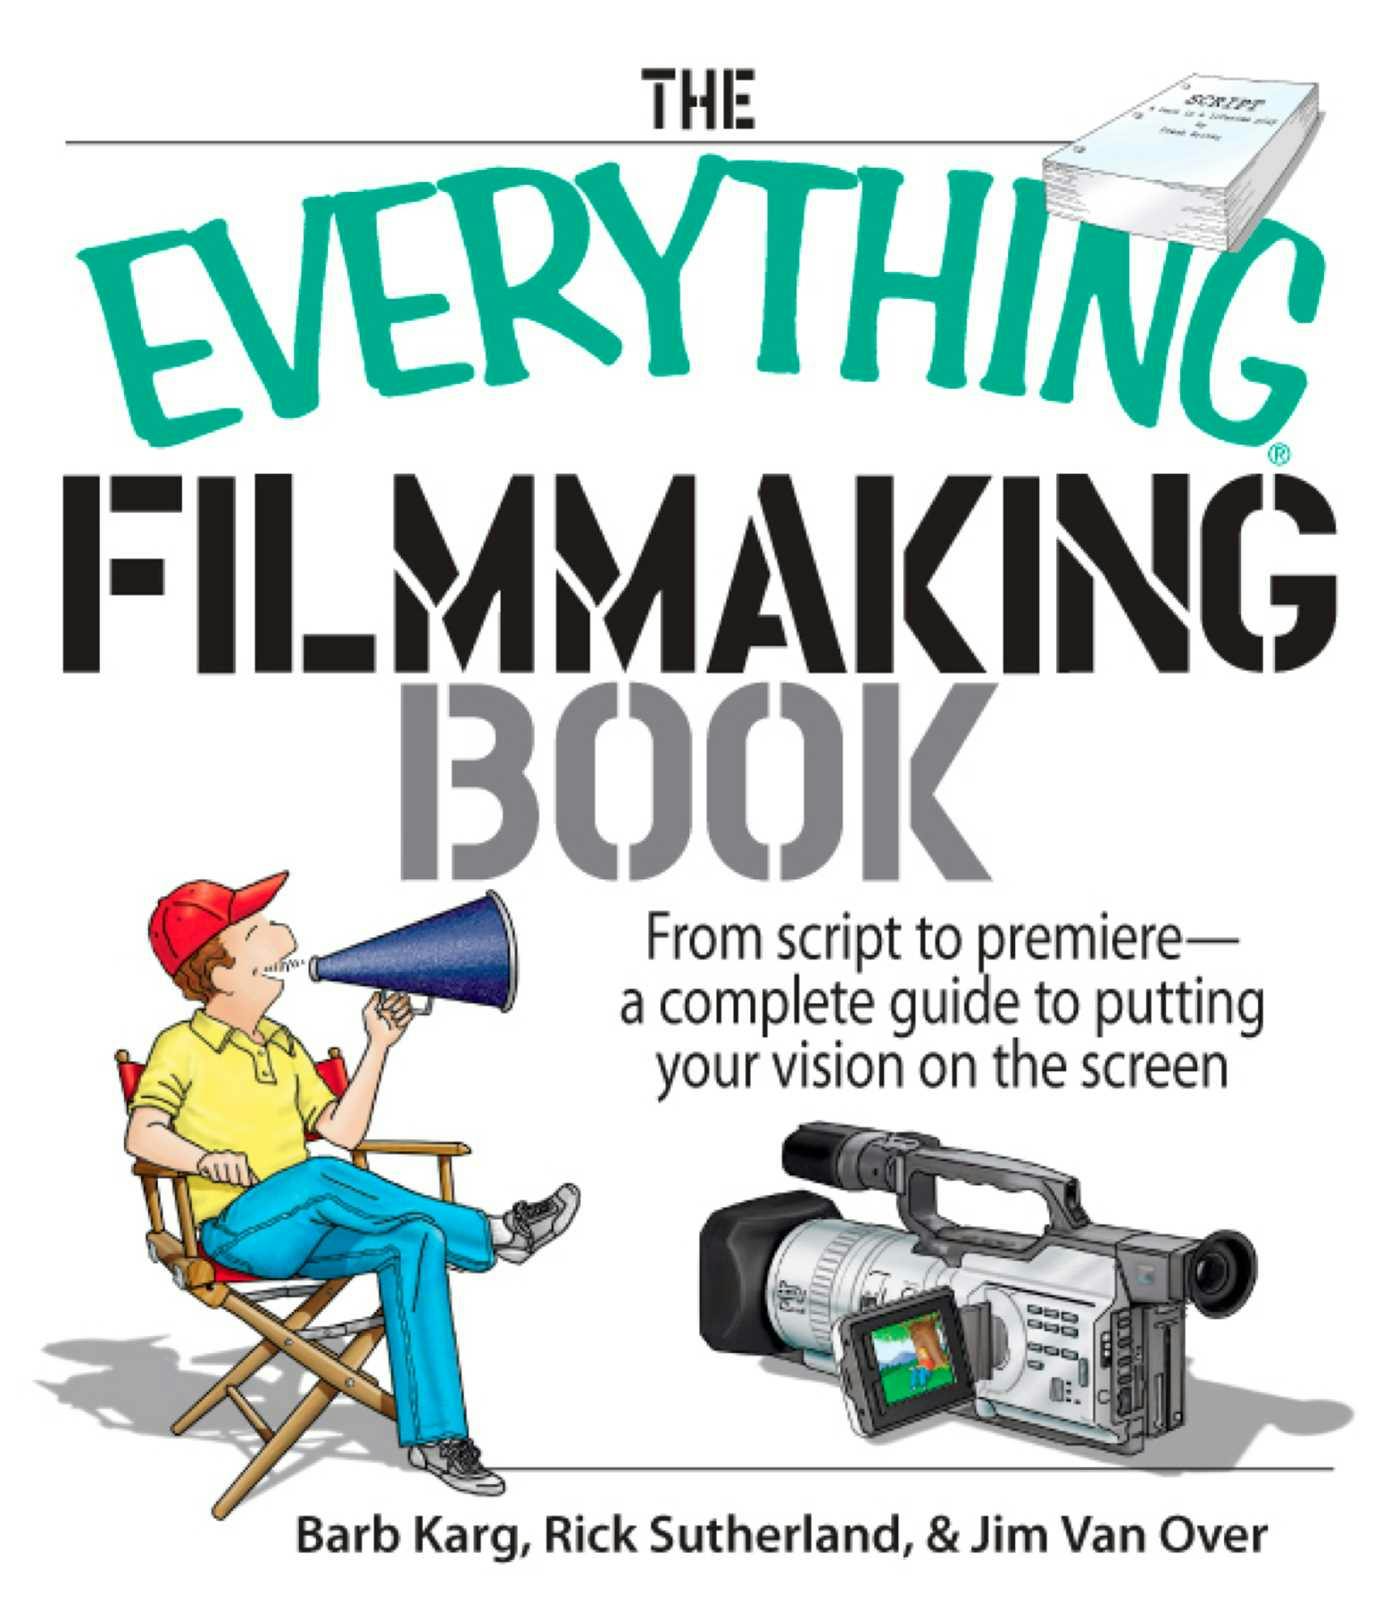 The Everything Filmmaking Book: From Script to Premiere -a Complete Guide to Putting Your Vision on the Screen - Barb Karg, Rick Sutherland, Jim Van Over